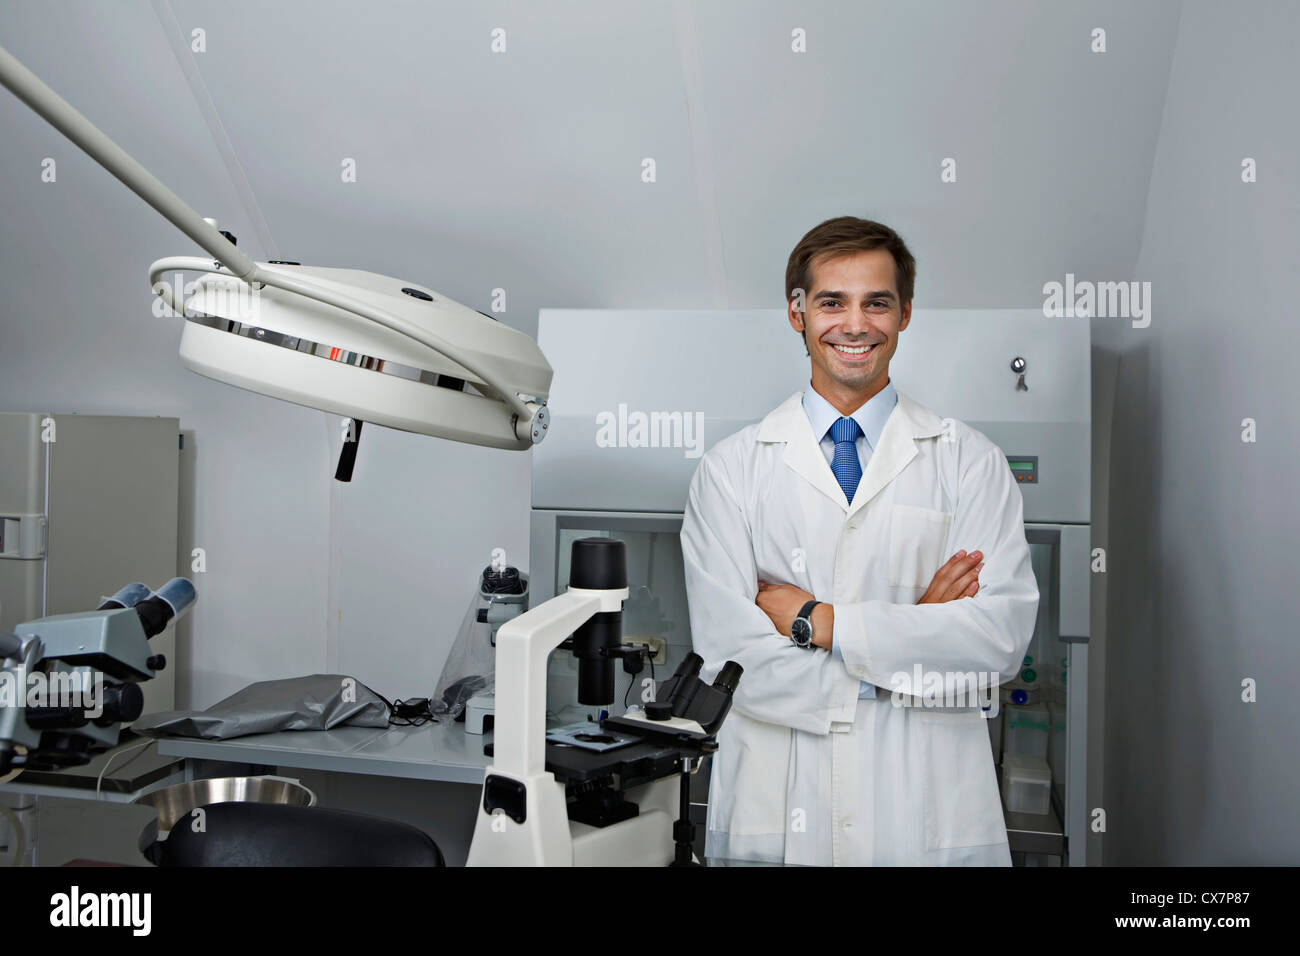 A cheerful research technician standing in a research lab, arms crossed Stock Photo